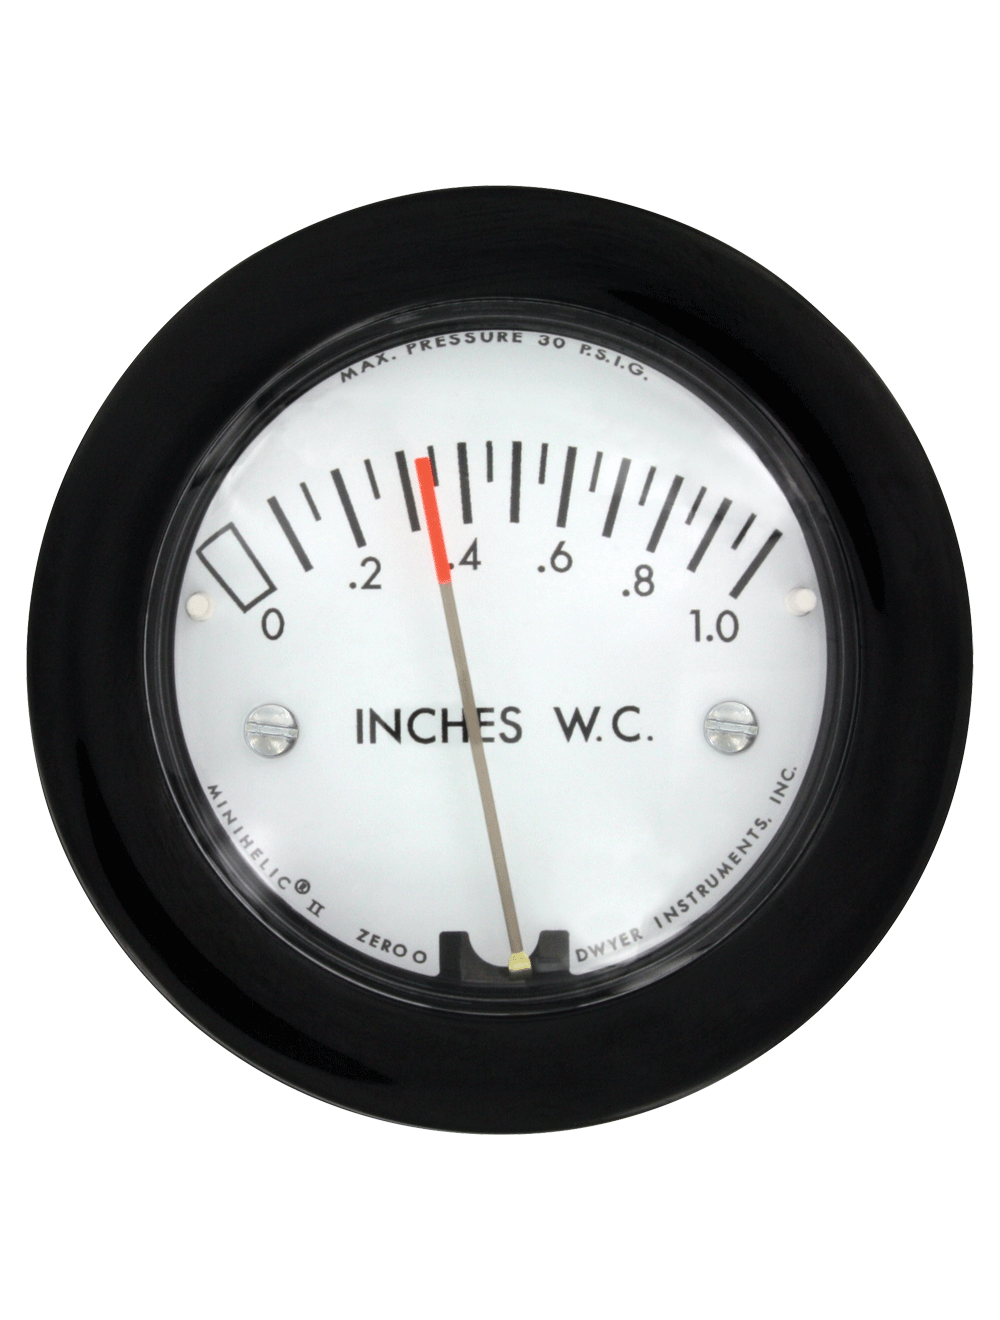 Dwyer Magnehelic Pressure Gauge Model 2005 0-5inches 15psi for sale online 